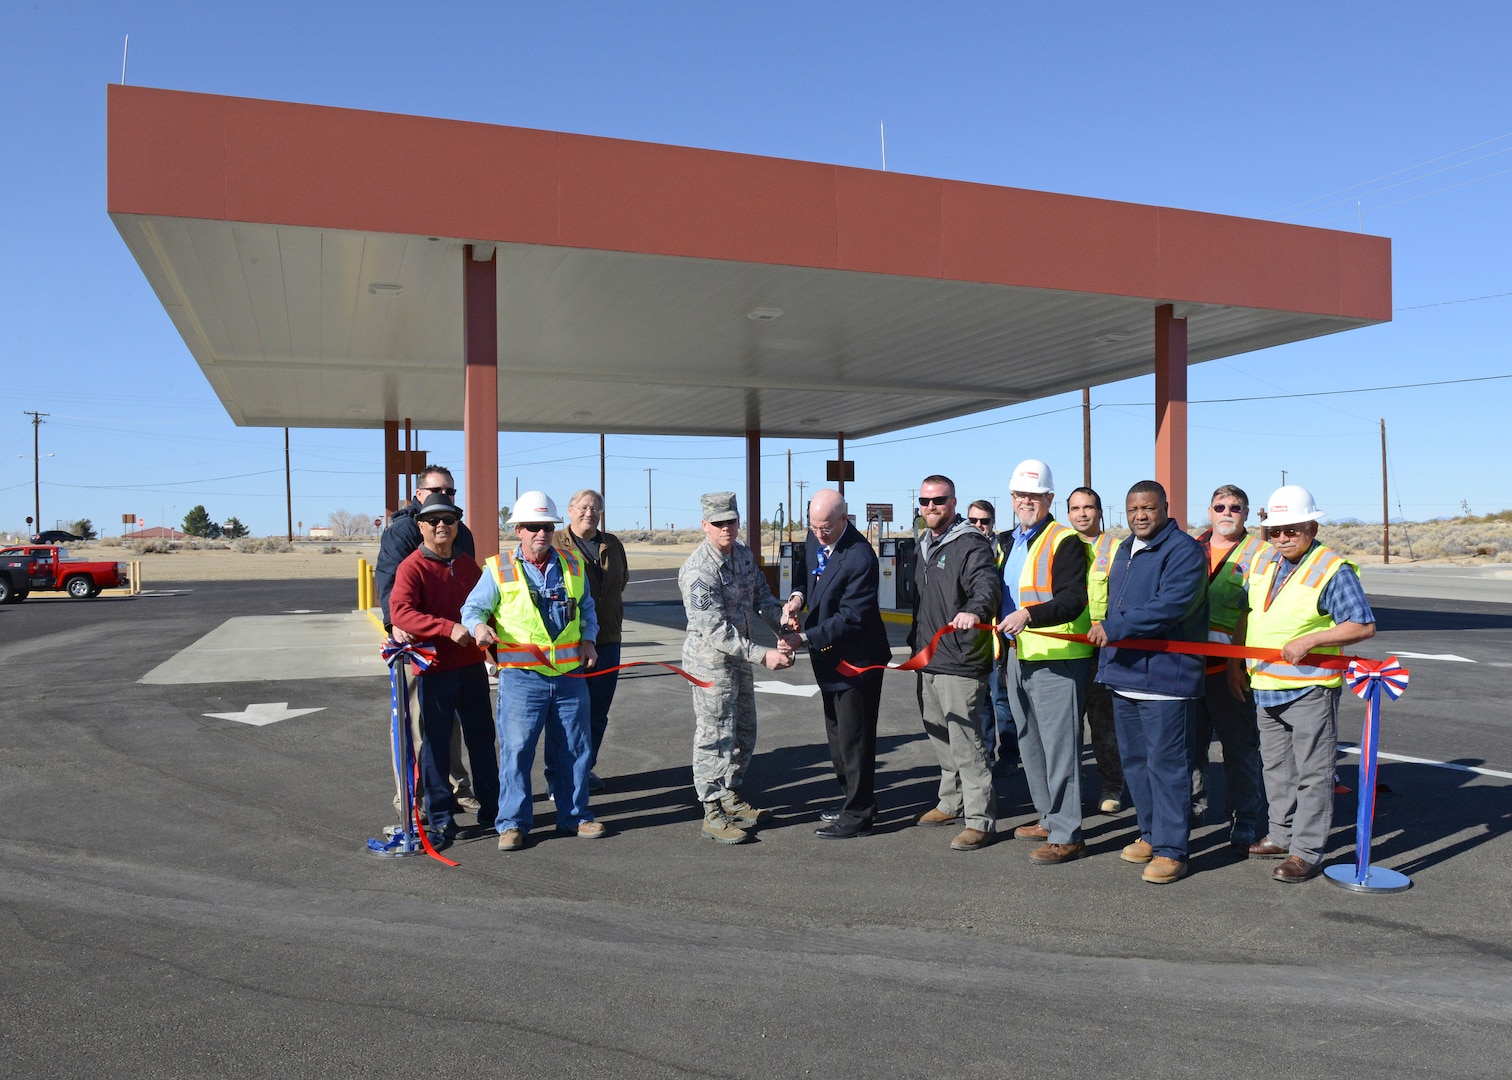 Center: Chief Master Sgt. Daniel Thompson, 412th Mission Support Group superintendent, and James Judkins, 412th Civil Engineer Group director, cut the ceremonial ribbon to celebrate the completion of major repairs and upgrades to the main base military gas station at Edwards Feb. 26. The completion of the project is the last of nine projects funded by the DLA for repairs and upgrades to facilities on Edwards. (U.S. Air Force photo by Kenji Thuloweit)